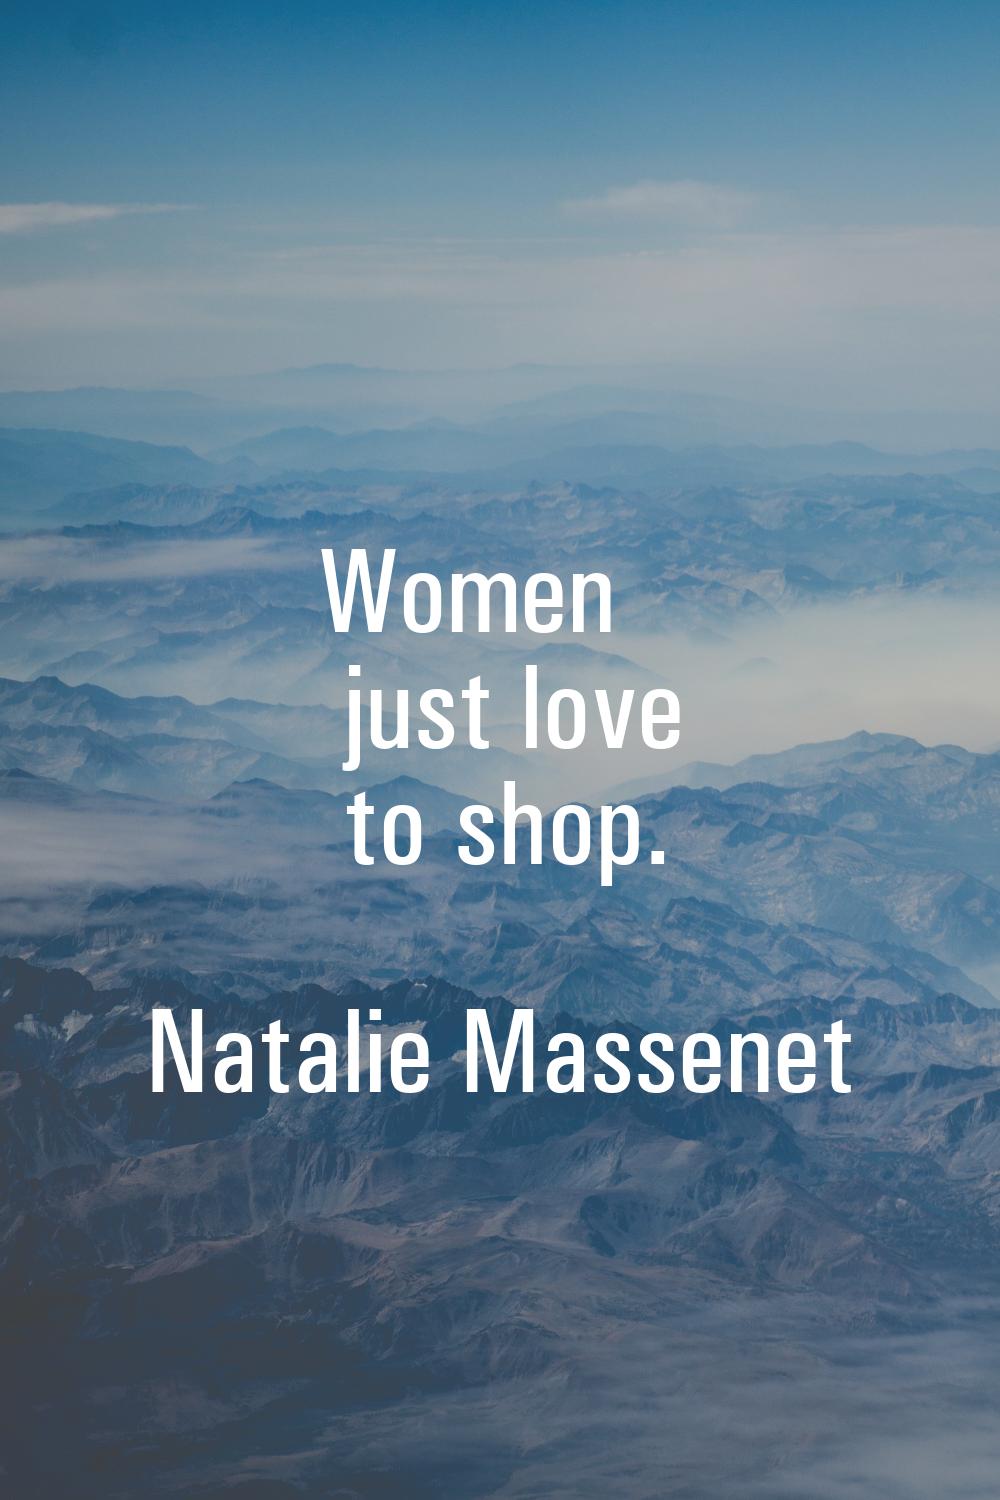 Women just love to shop.